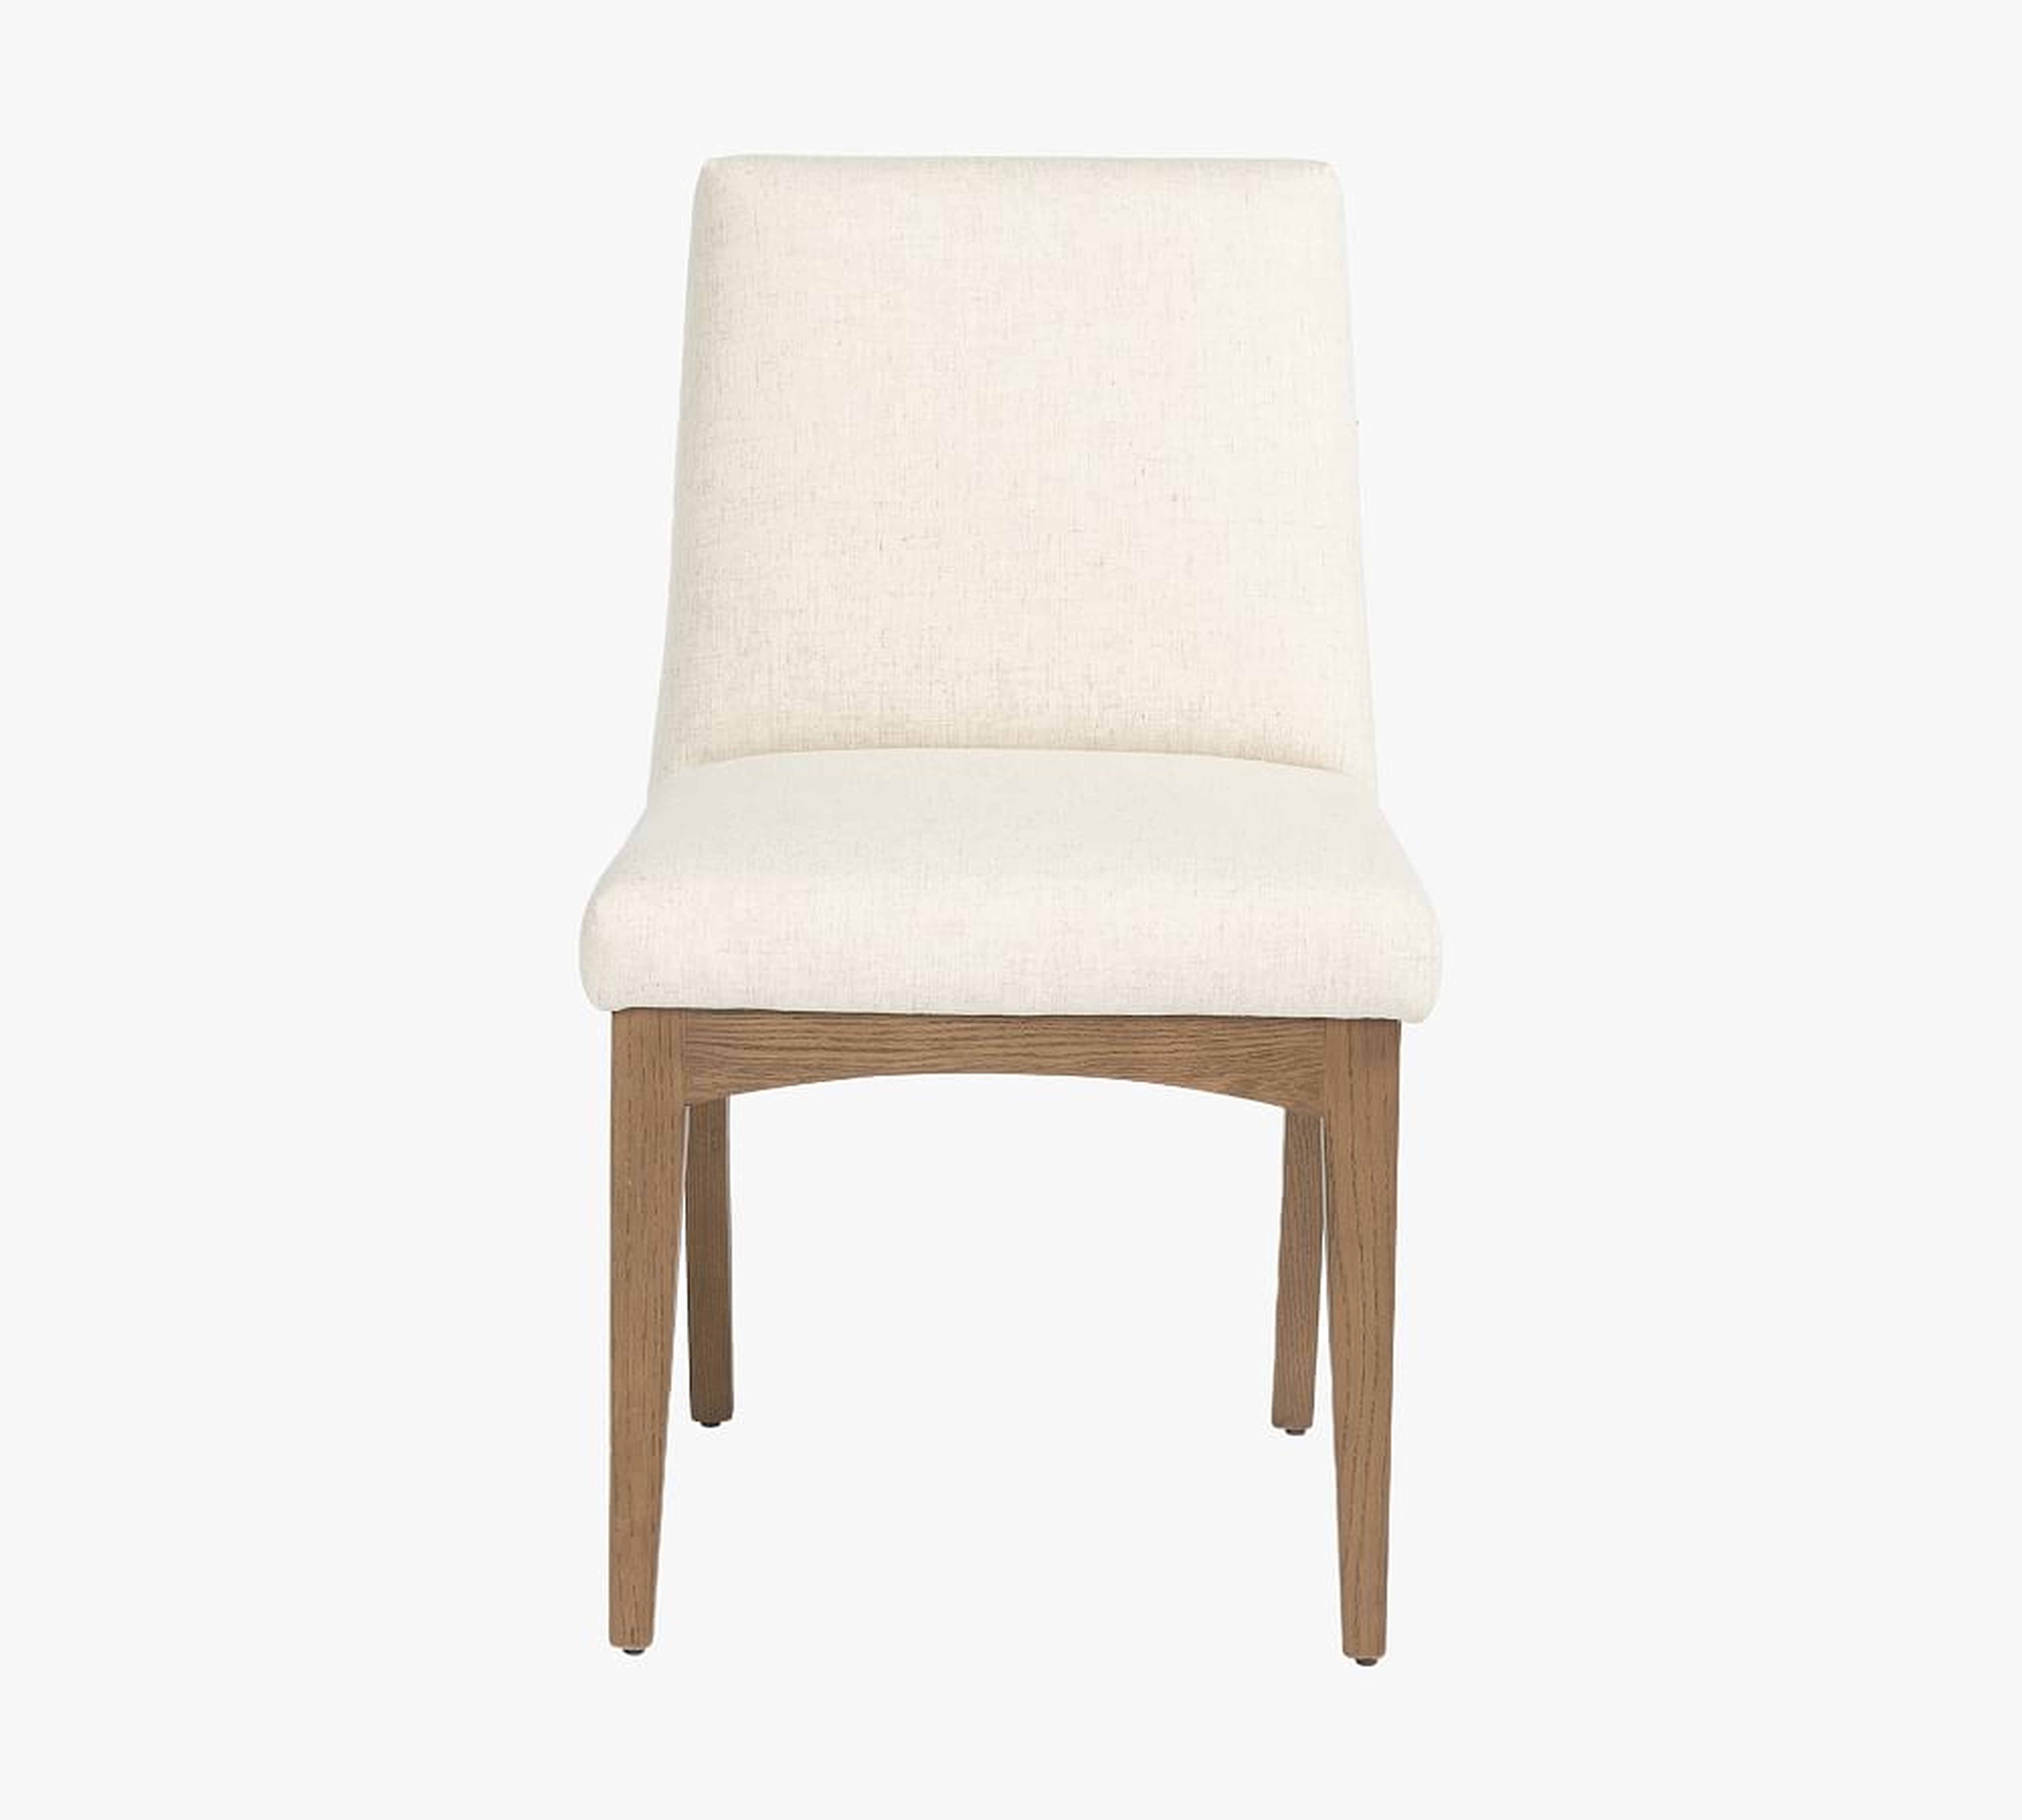 Stratford Upholstered Dining Chair, Savile Flax - Pottery Barn